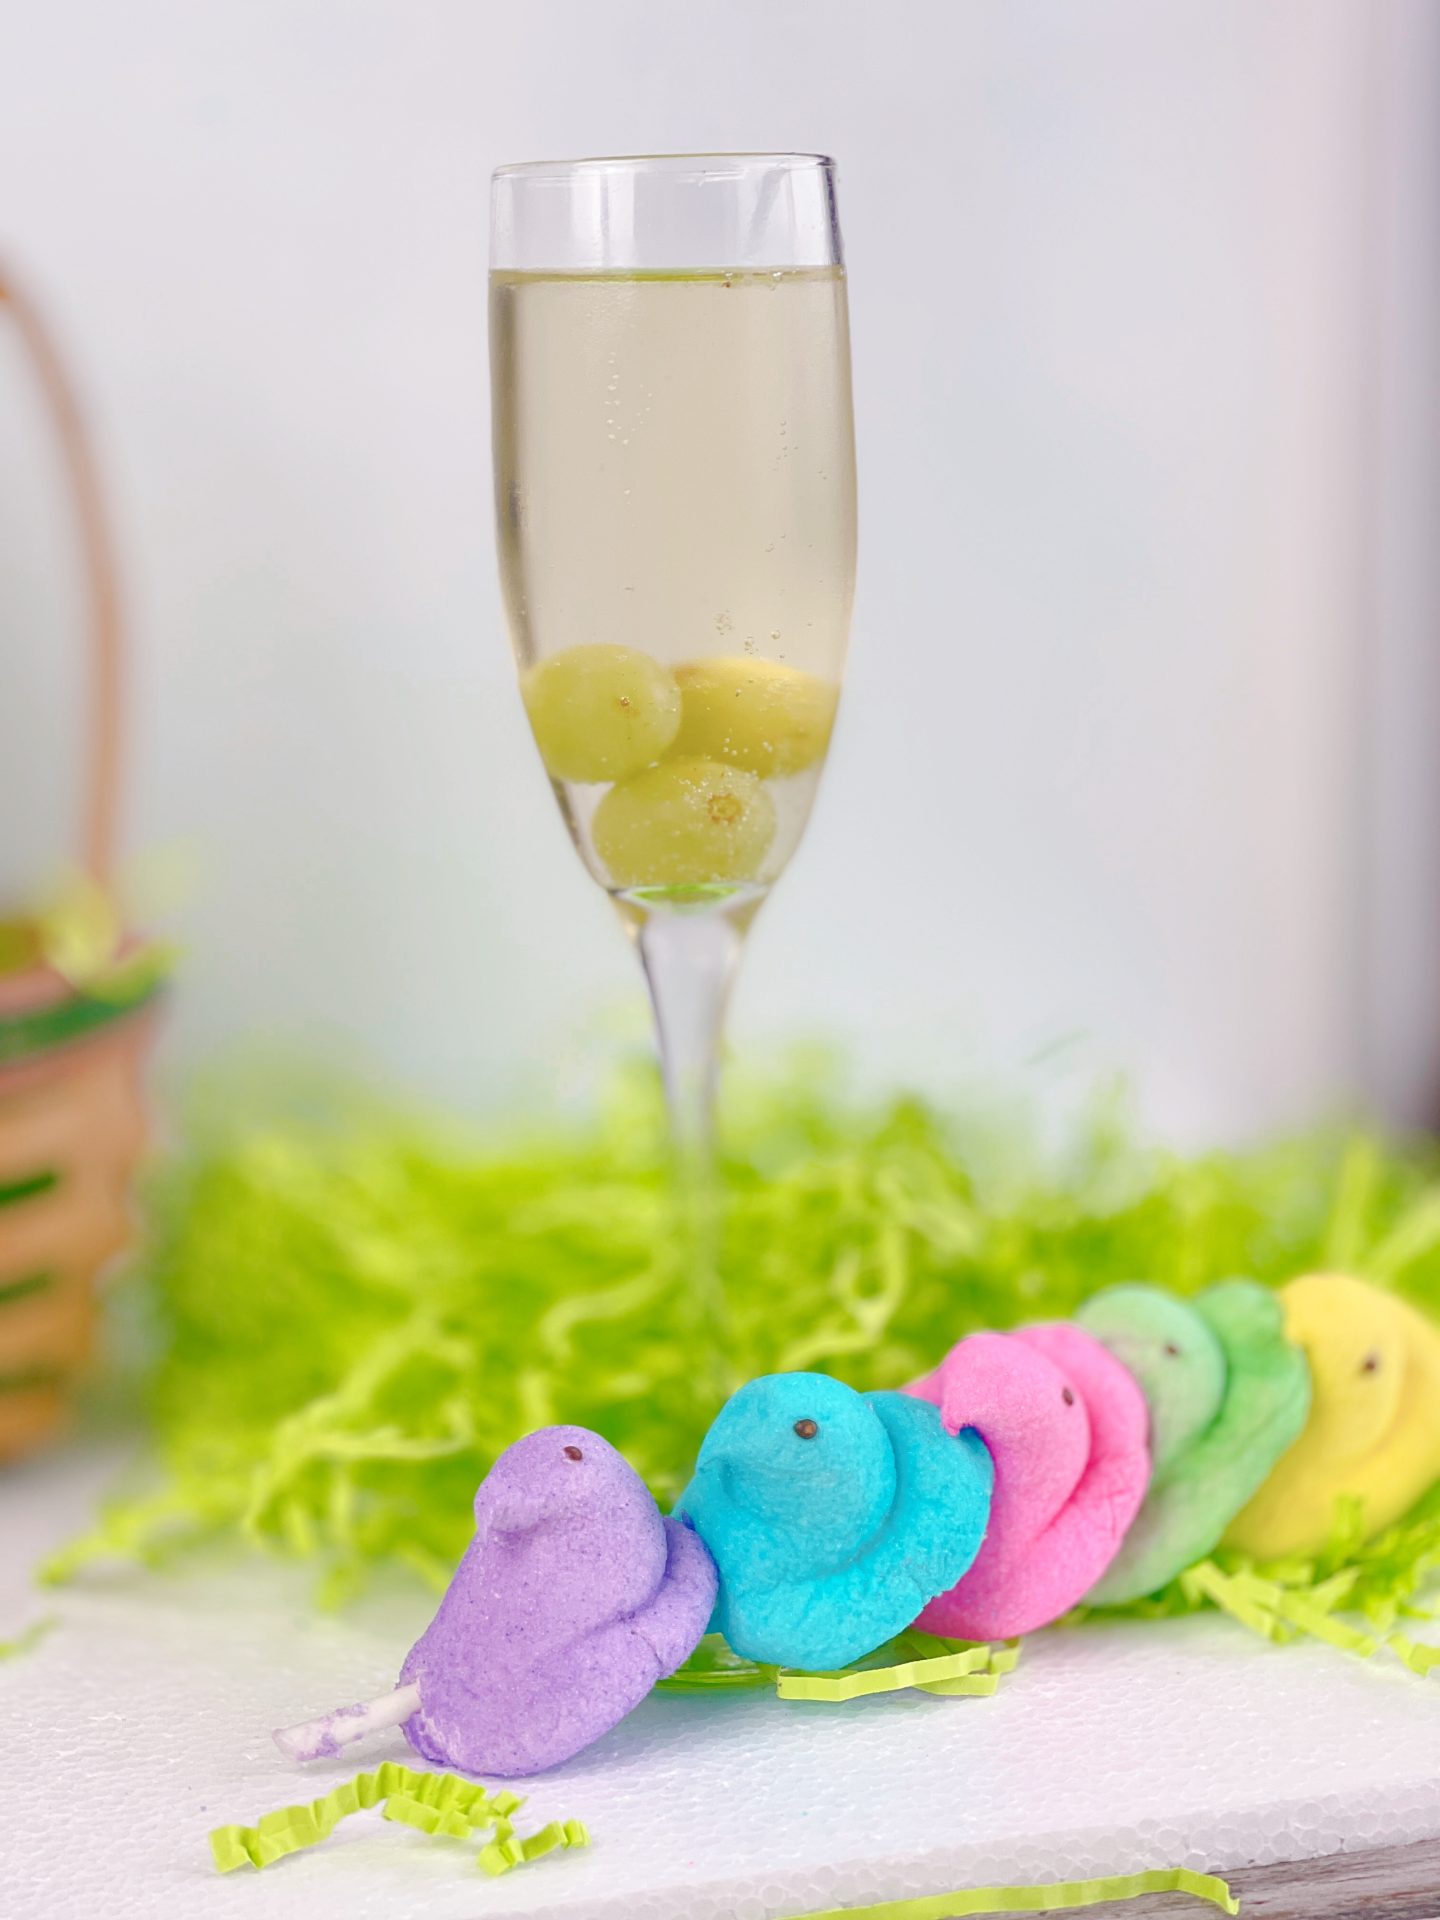 Easter Morning Mimosas from Farmwife Feeds, some sparkling white grape juice and your favorite champagne, prosecco or sparkling wine for a refreshing cocktail. #mimosa #cocktail #Easter